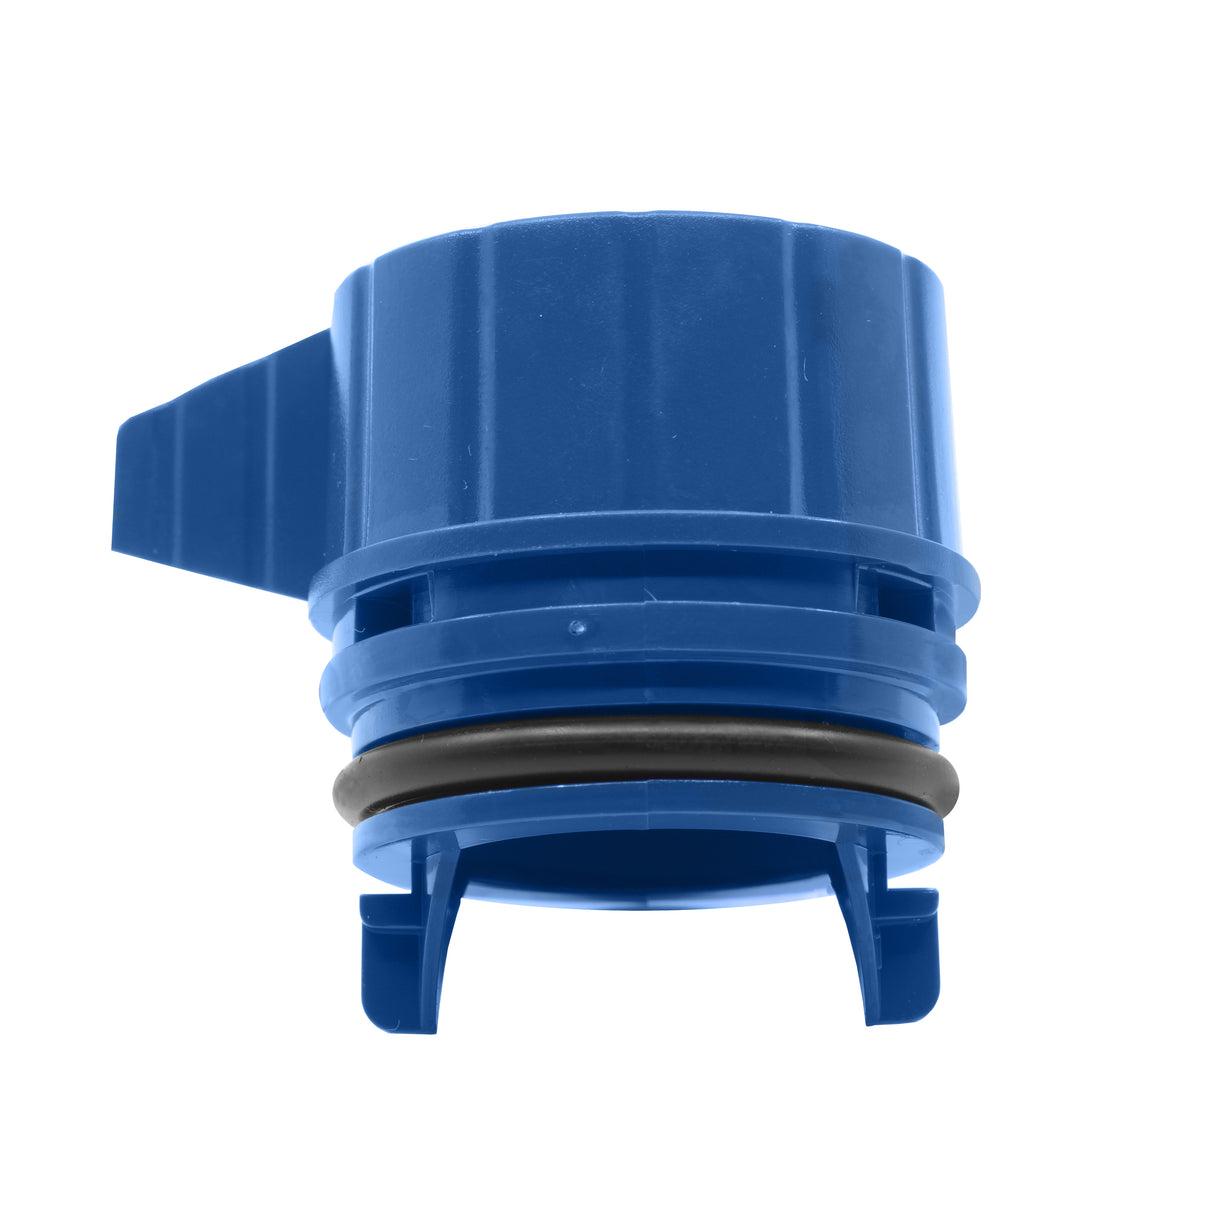 Heater Plug for BioMaster 250 / 350 / 600 / 850 & BioMaster Thermo 250 / 350 / 600 / 850 side view